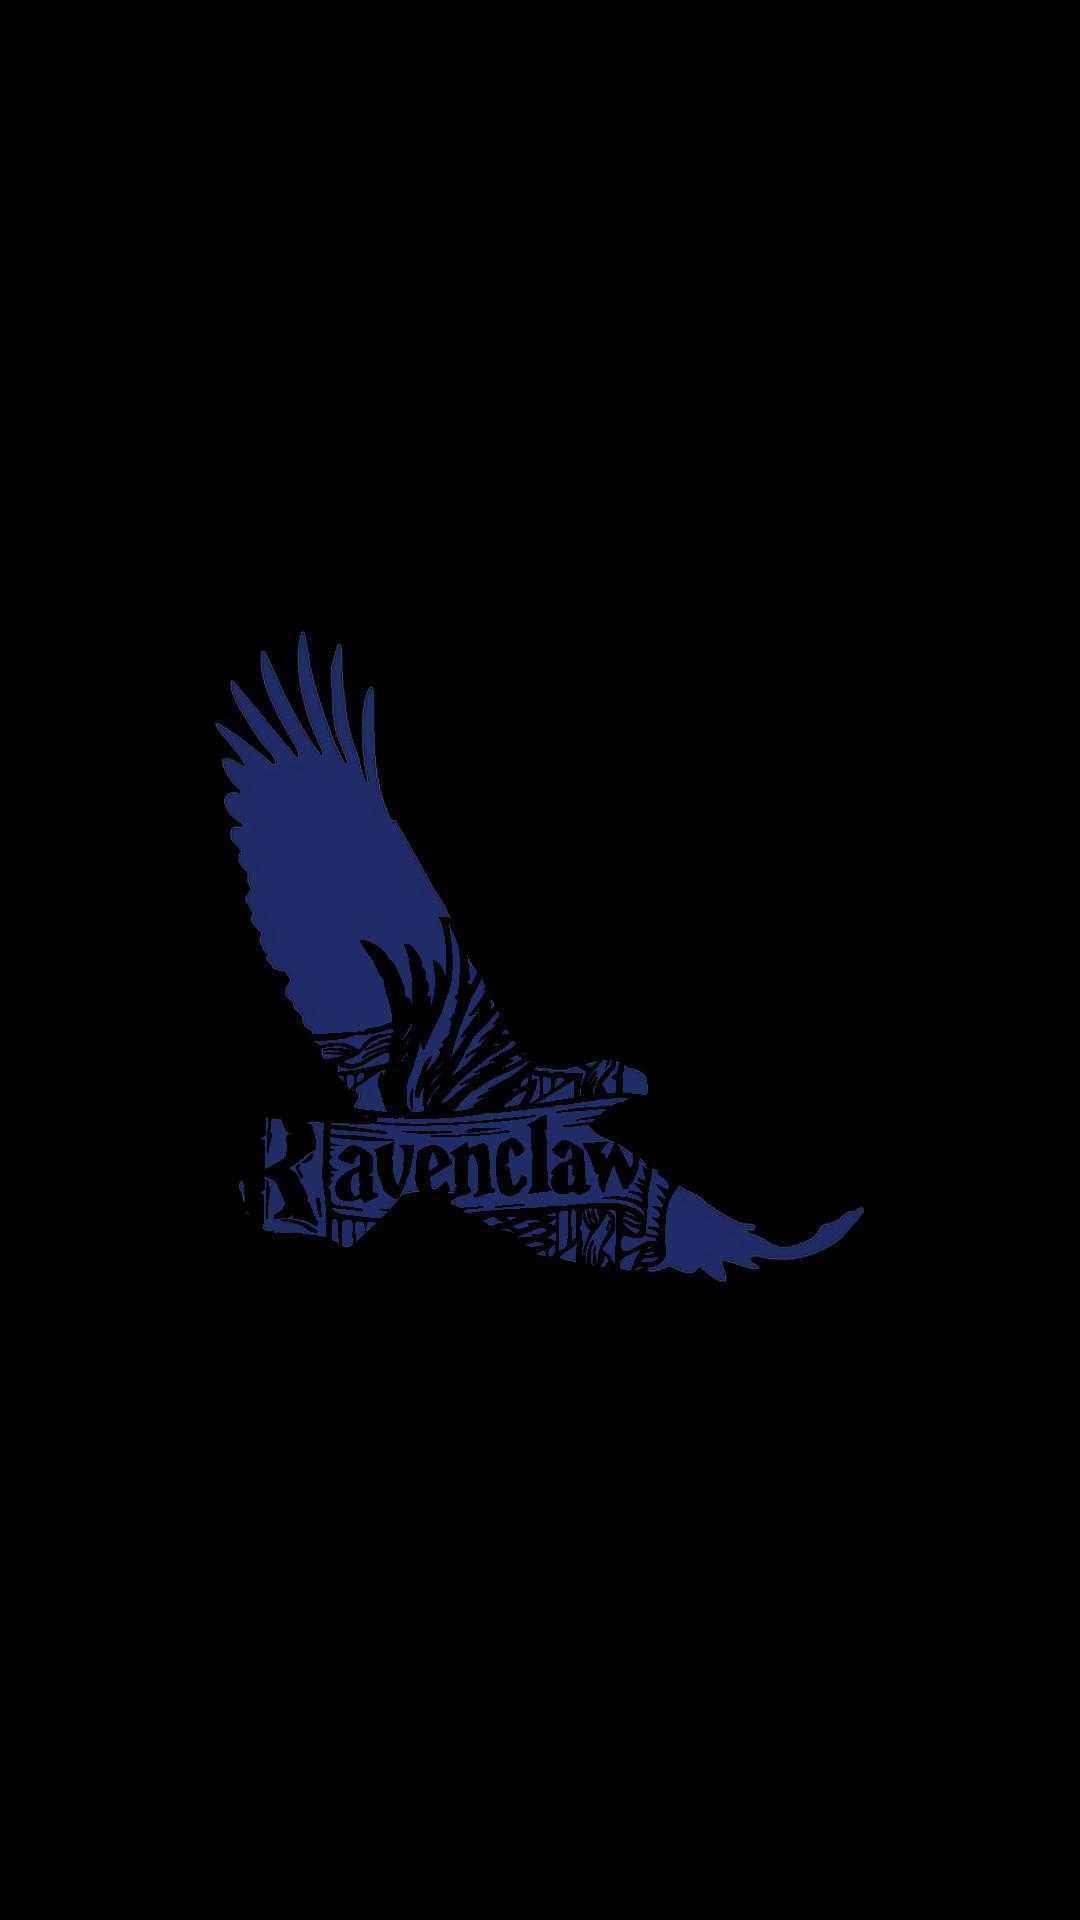 Ravenclaw Wallpaper  Top 30 Free Ravenclaw Backgrounds for iPhone